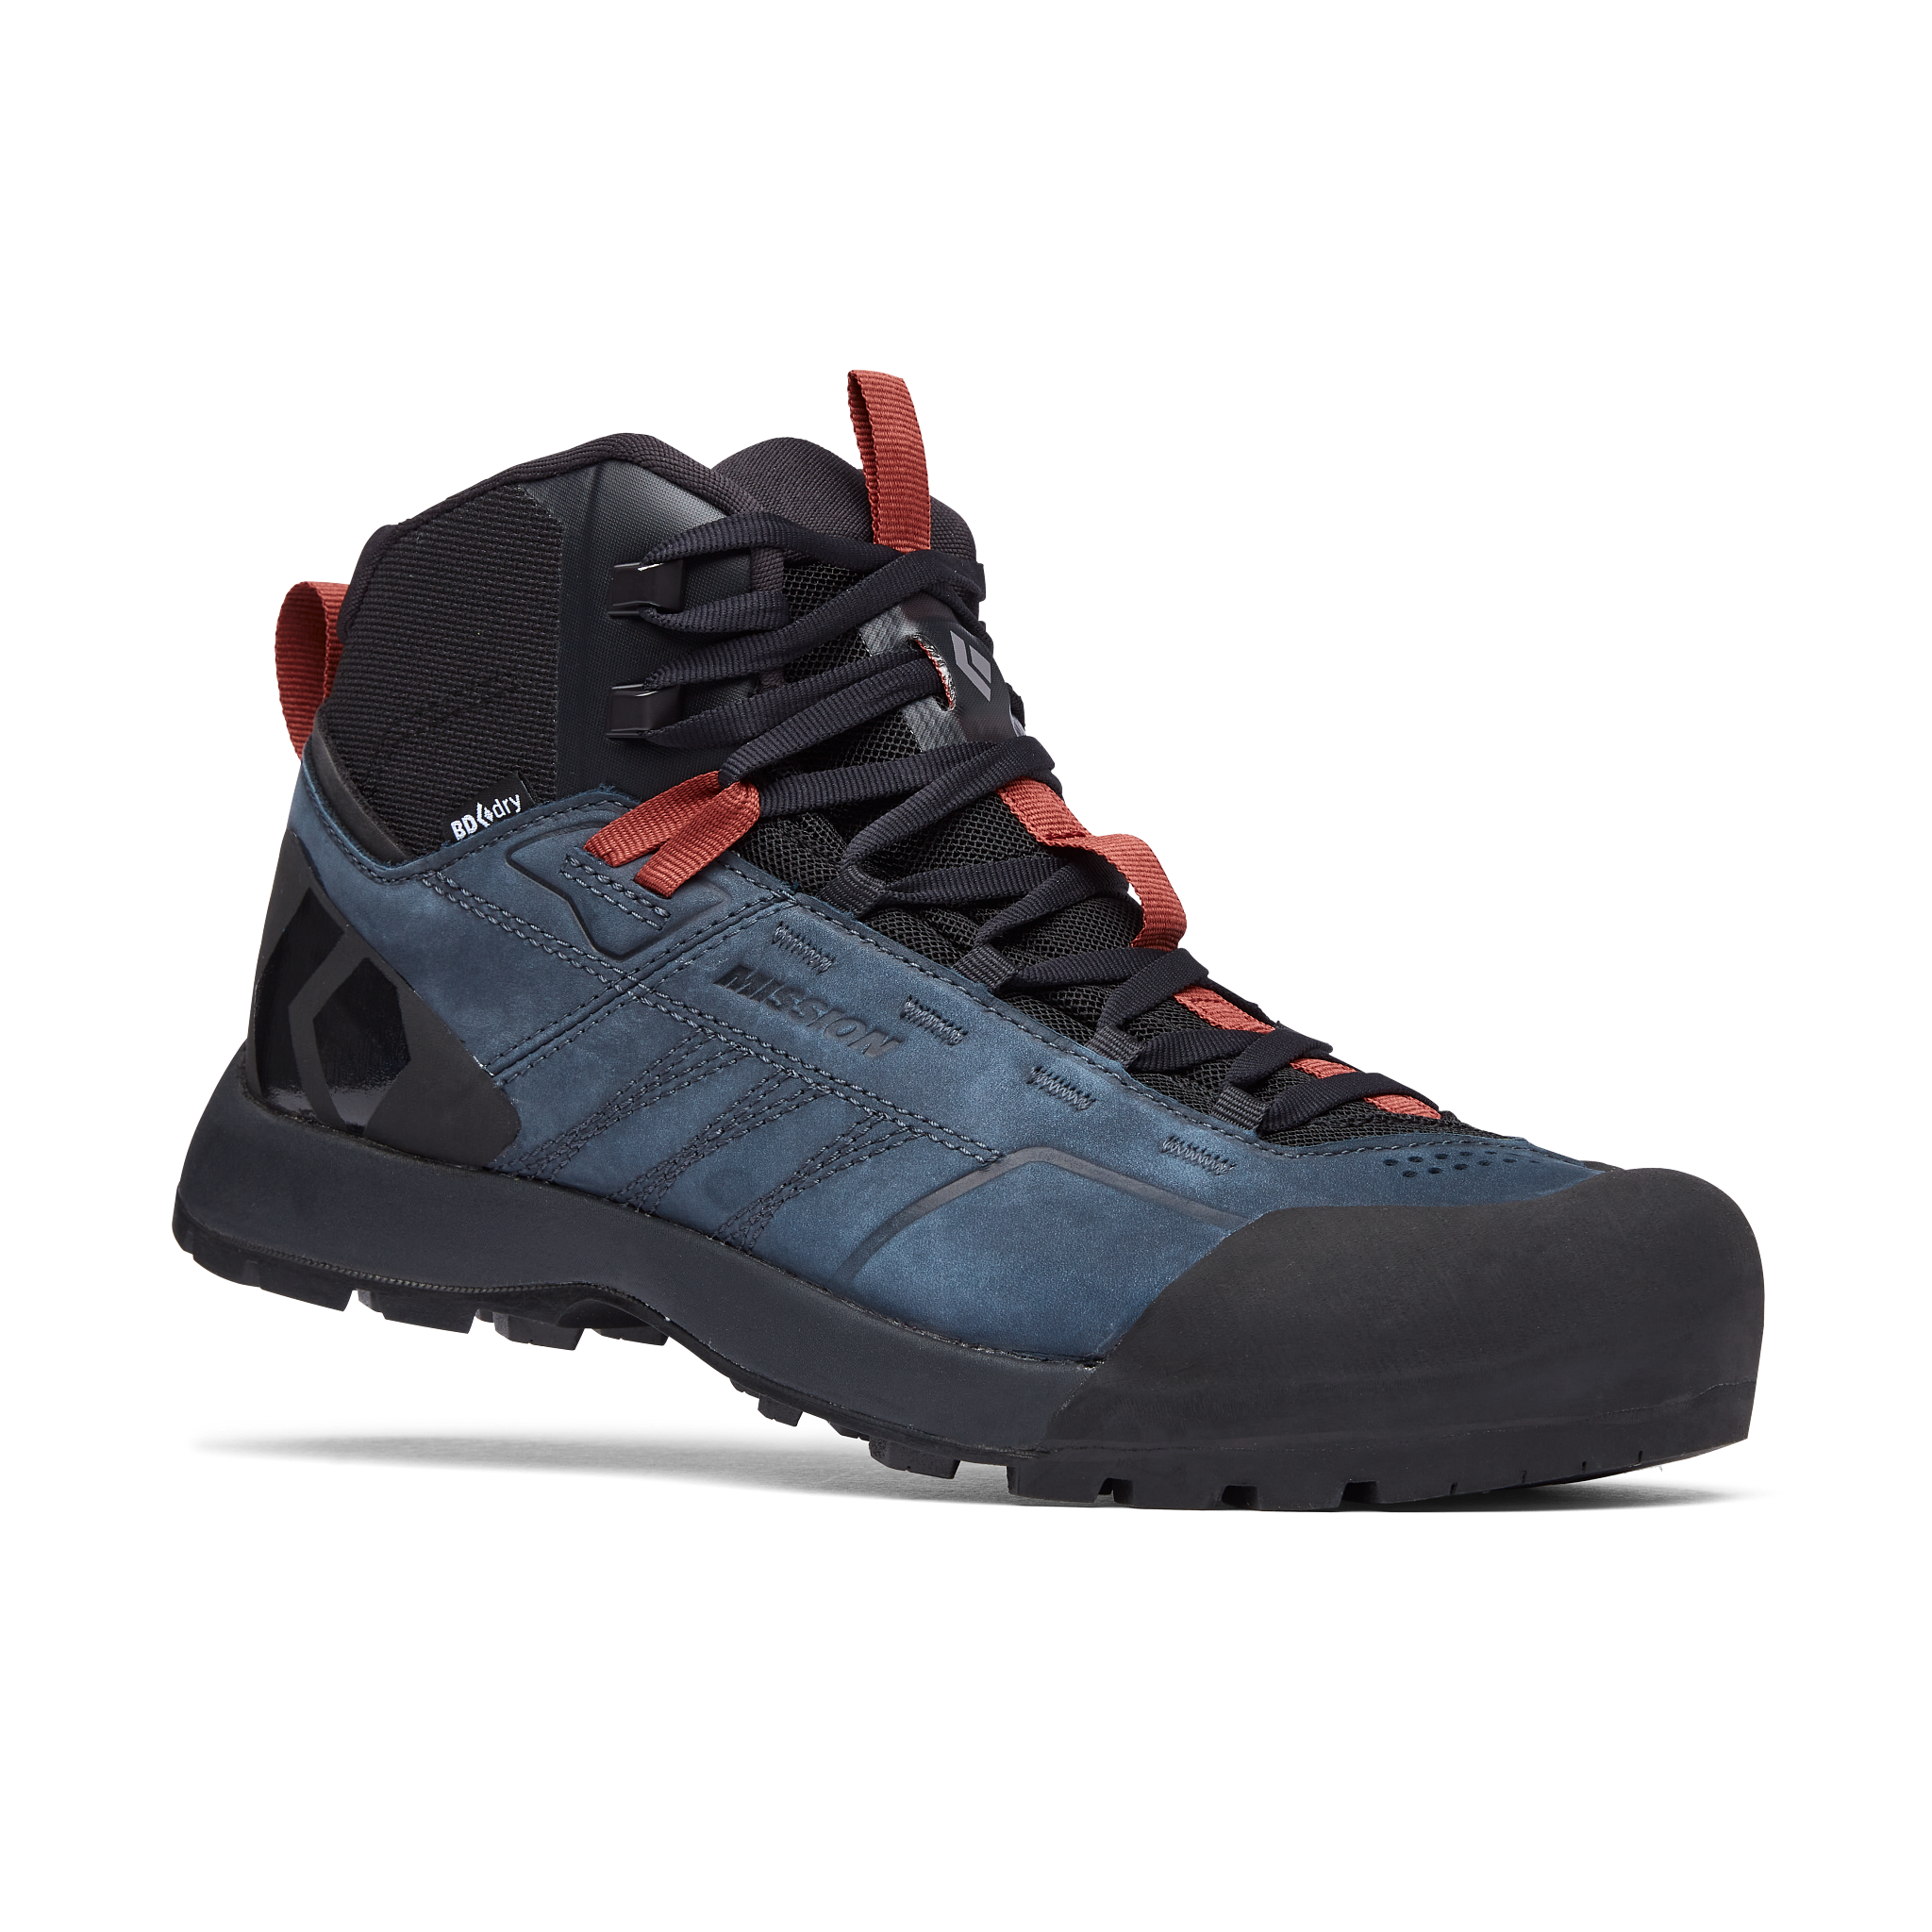 Black Diamond Equipment Men's Mission Leather Mid Waterproof Approach Shoes 2nds US 13 Eclipse/Red Rock